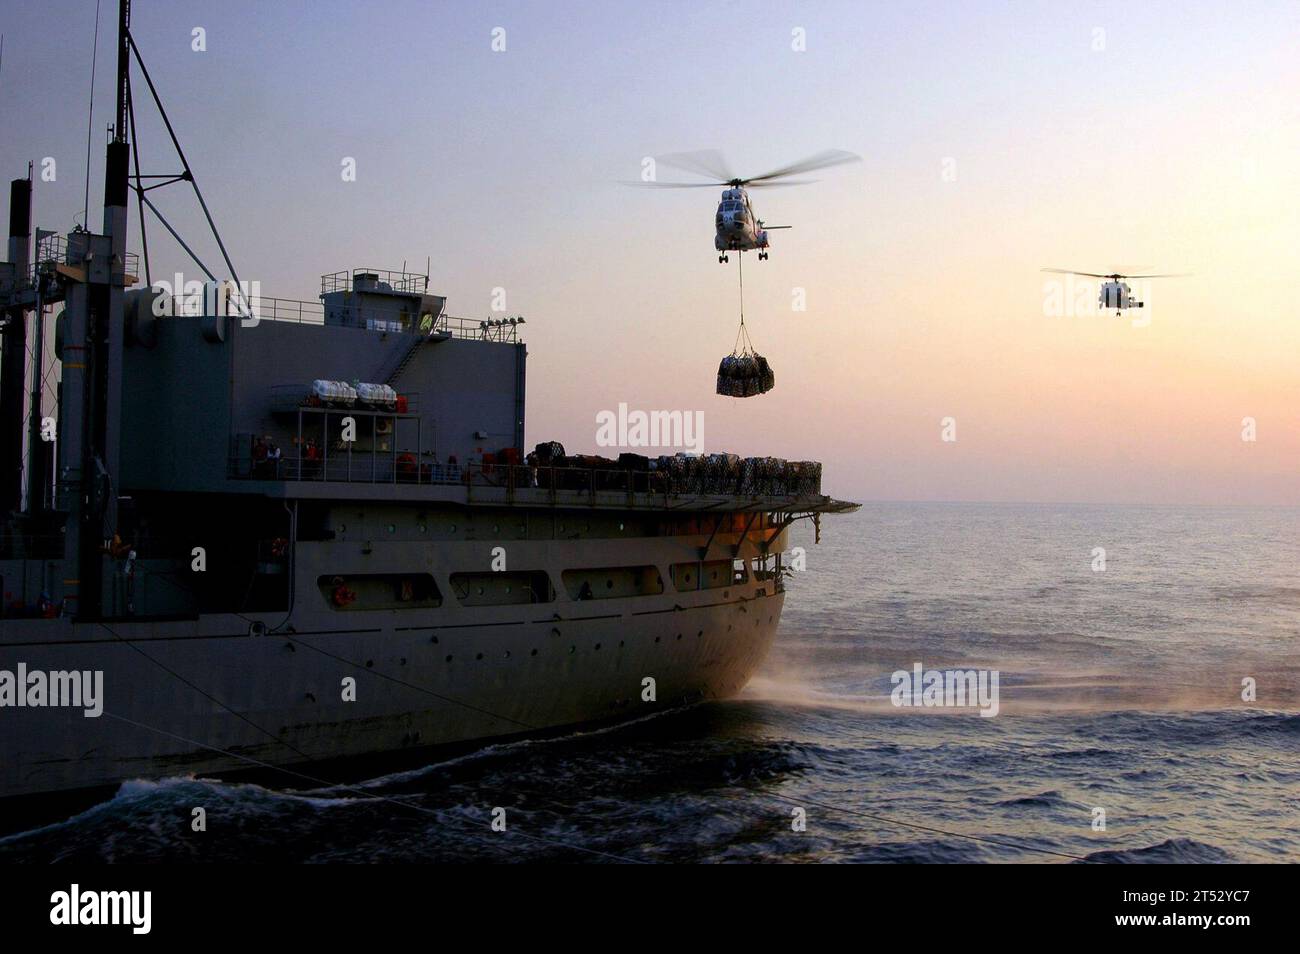 0611300490C-004 Arabian Sea (Nov. 30, 2006) - An SA-330 Puma helicopter assigned to Military Sealift Command (MSC) combat stores ship USNS Spica (T-AFS 9) moves supplies during a vertical replenishment (VERTREP) between Spica and the Nimitz-class aircraft carrier USS Dwight D. Eisenhower (CVN 69). Eisenhower and embarked Carrier Air Wing Seven (CVW-7) are on a regularly scheduled deployment in support of Maritime Security Operations (MSO). U.S. Navy Stock Photo